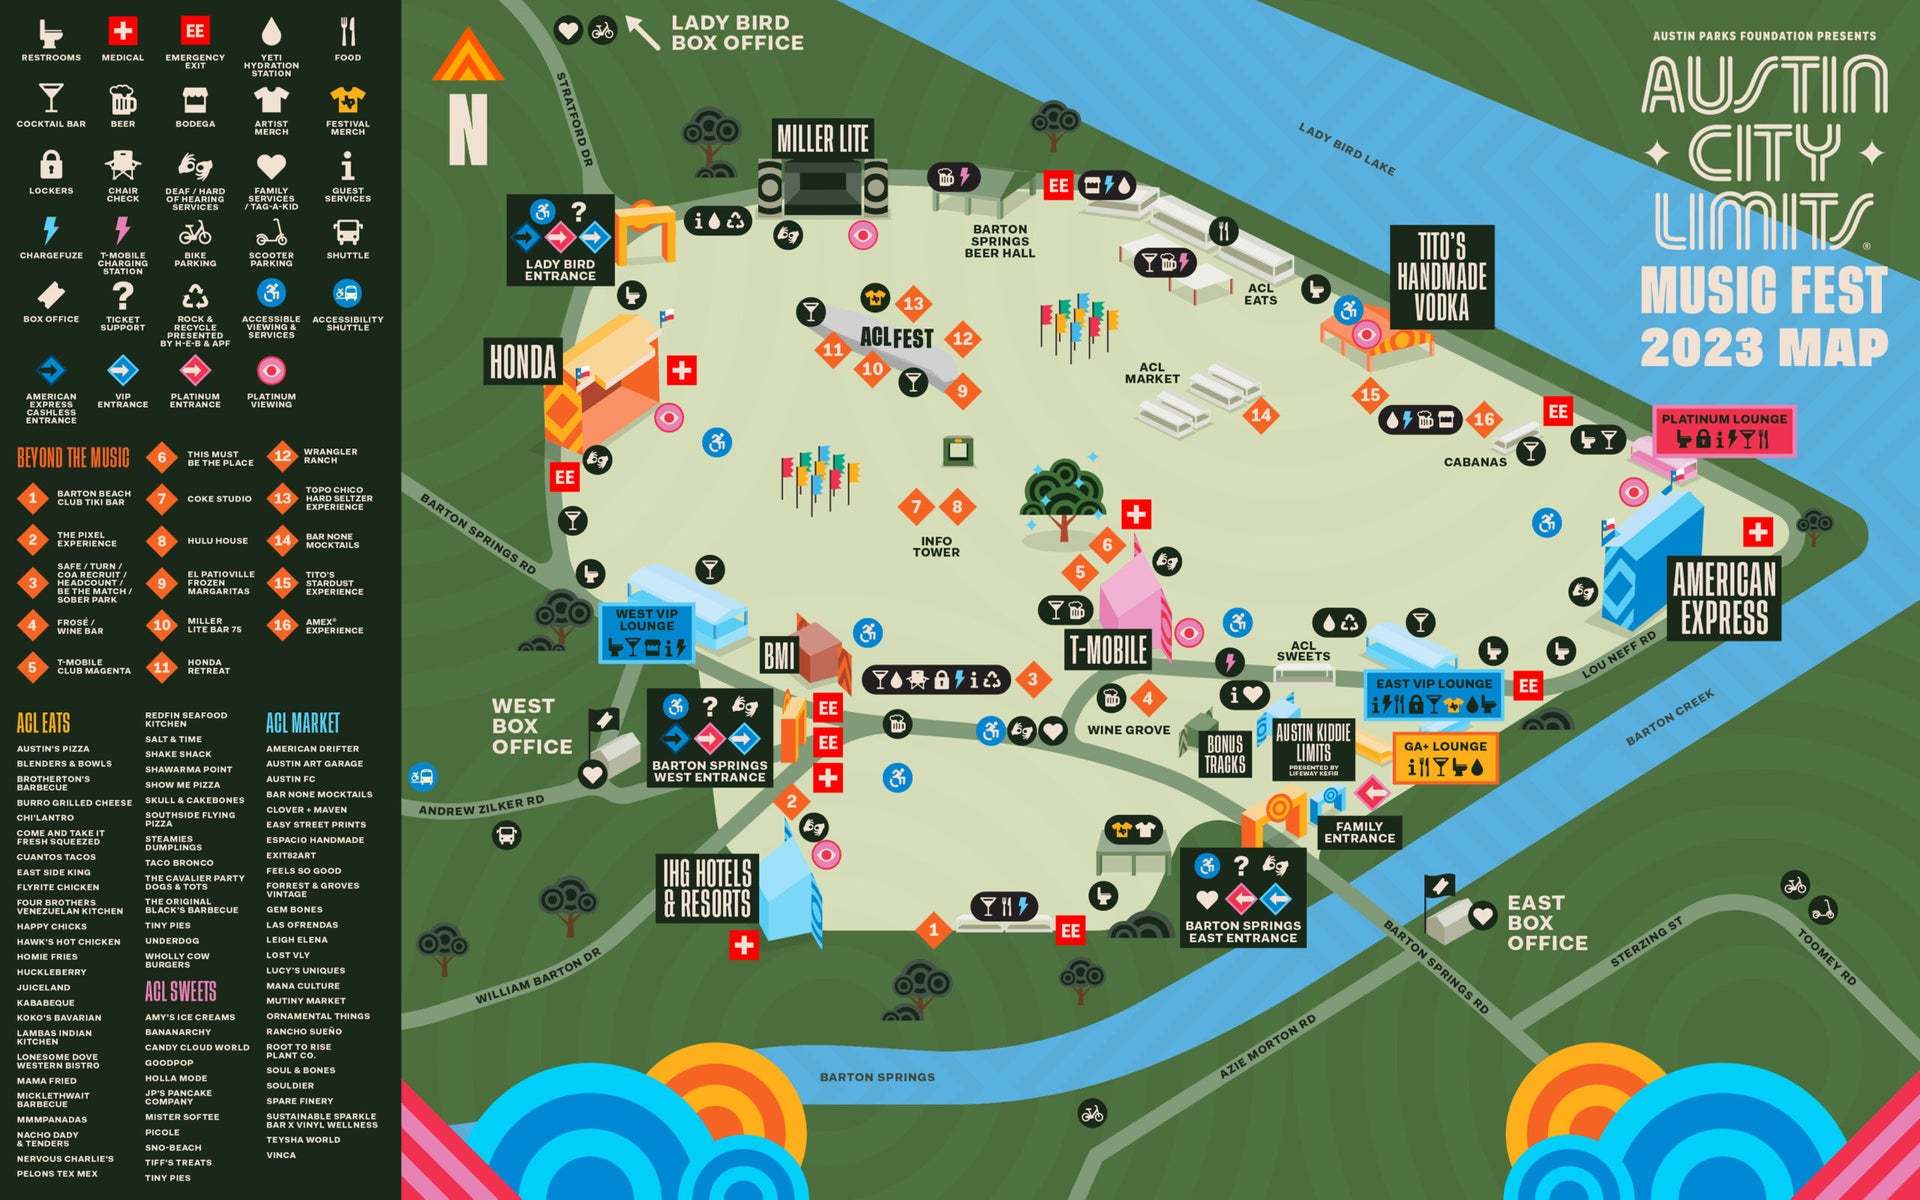 Going to the ACL Music Festival? Get 5 credit, expedited entry if you